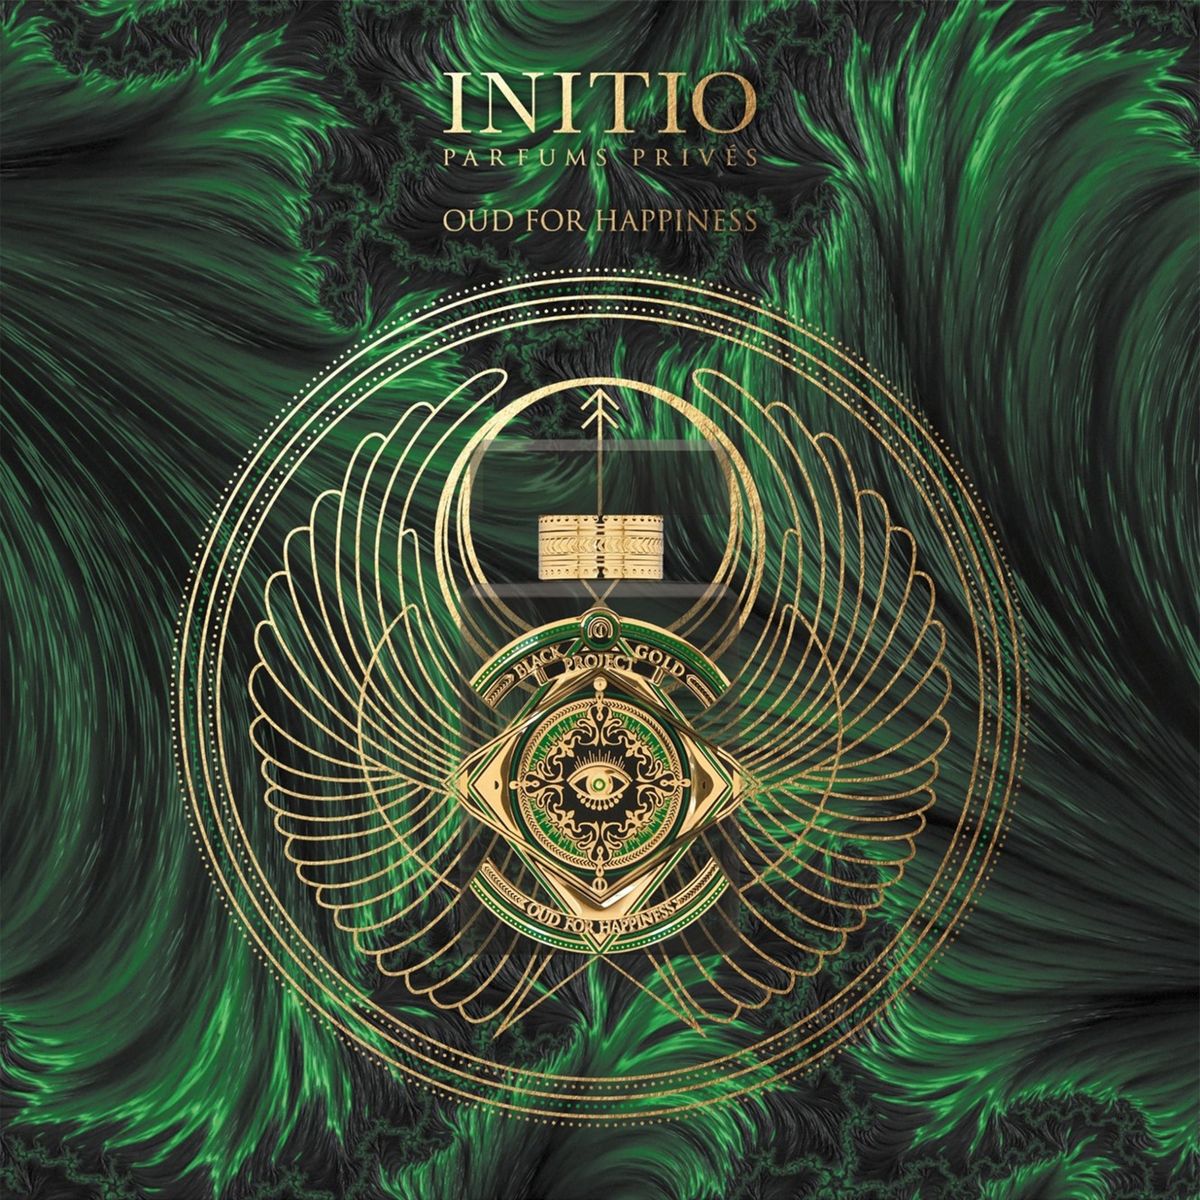 INITIO Parfums Prives OUD FOR HAPPINESS